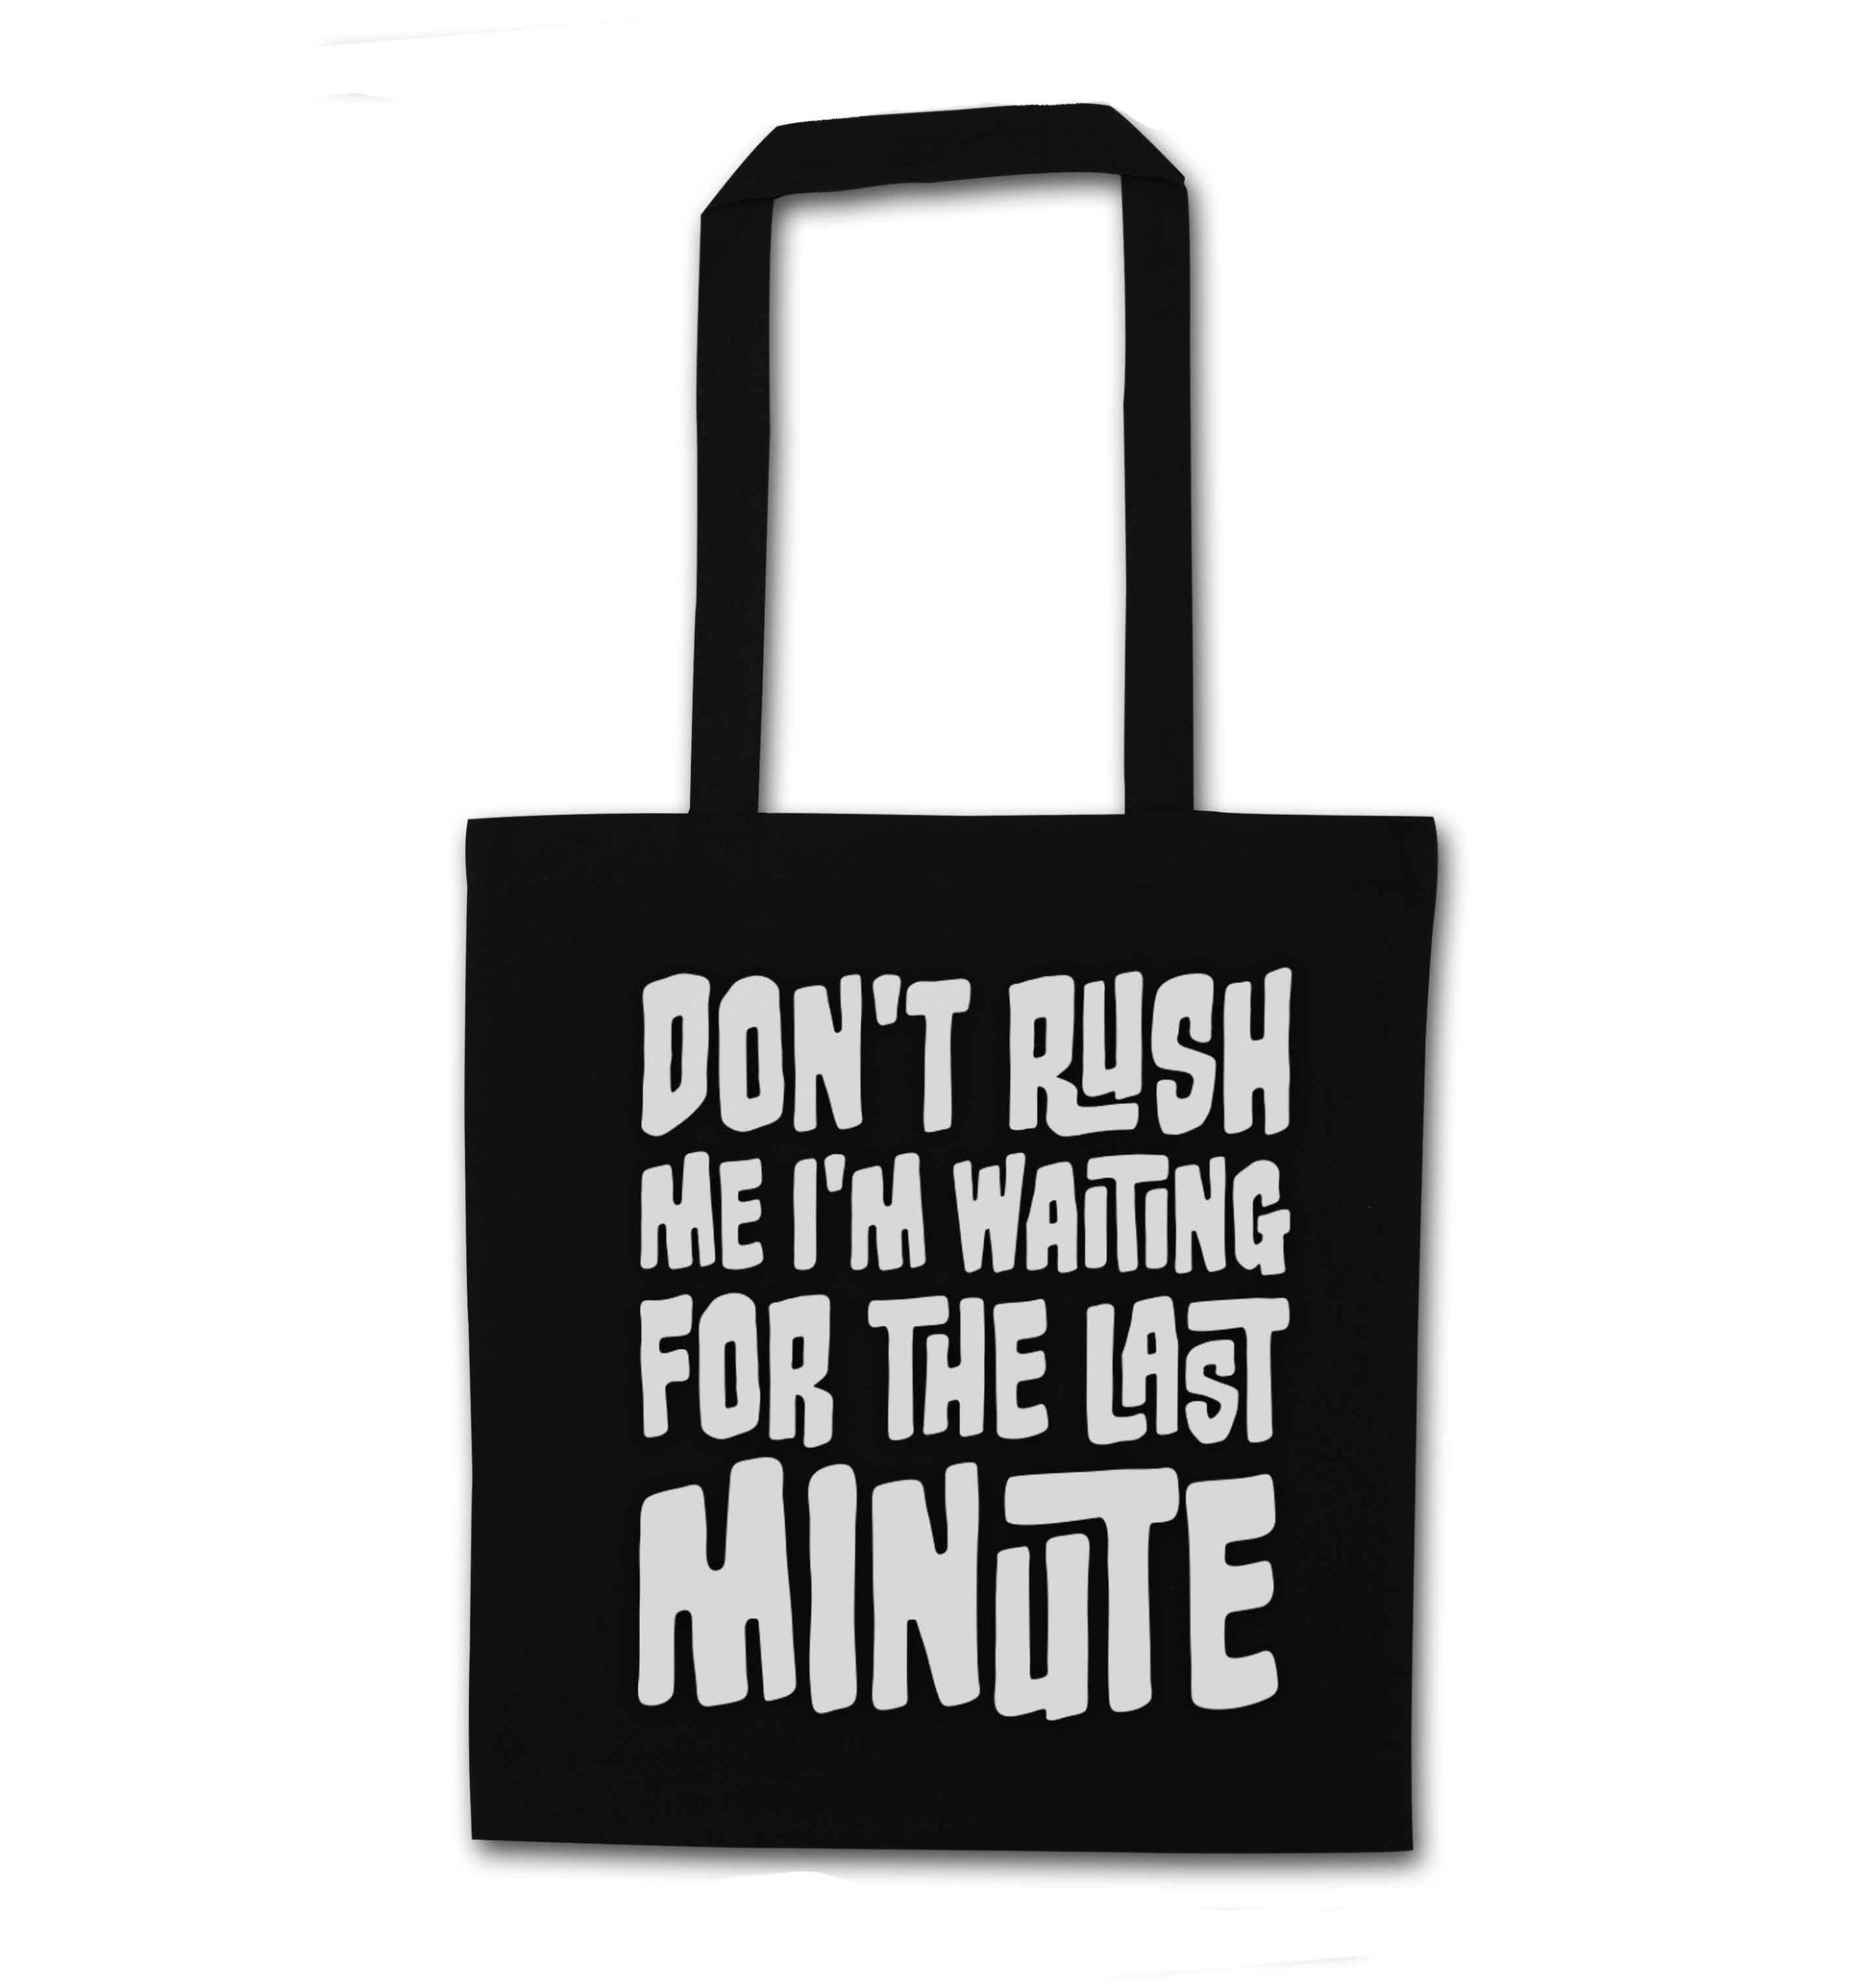 Don't rush me I'm waiting for the last minute black tote bag